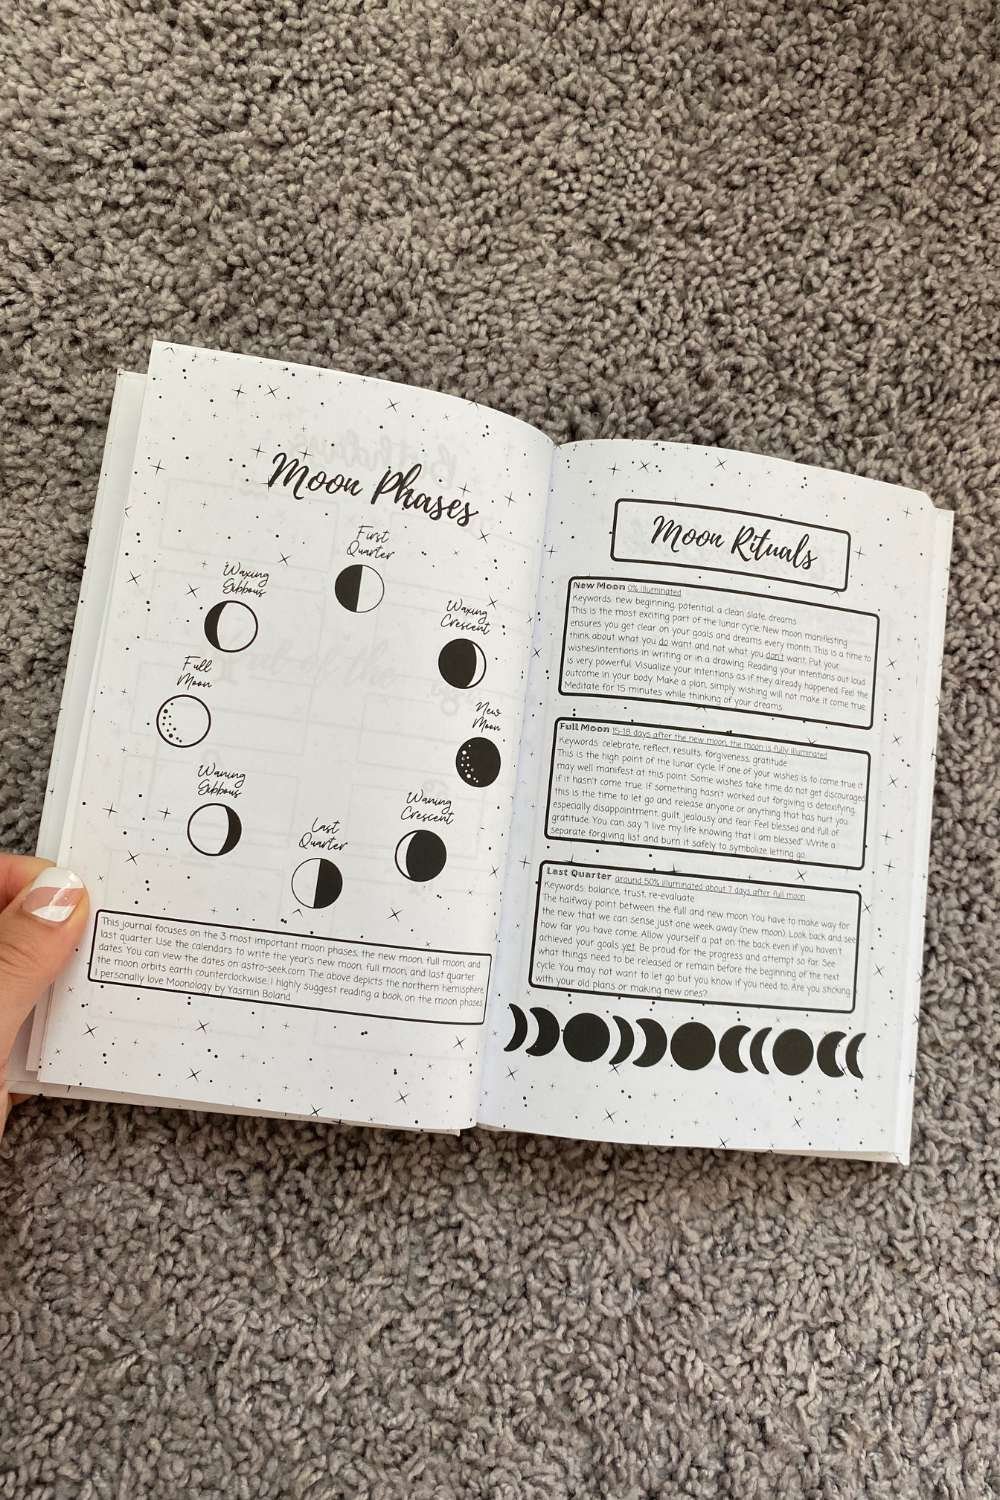 "Dive into our Self-Care Witchy Bullet Journal with monthly moon rituals! Designed for those who crave a ready-to-use bullet journal infused with magic. Start your mystical self-care journey today!"